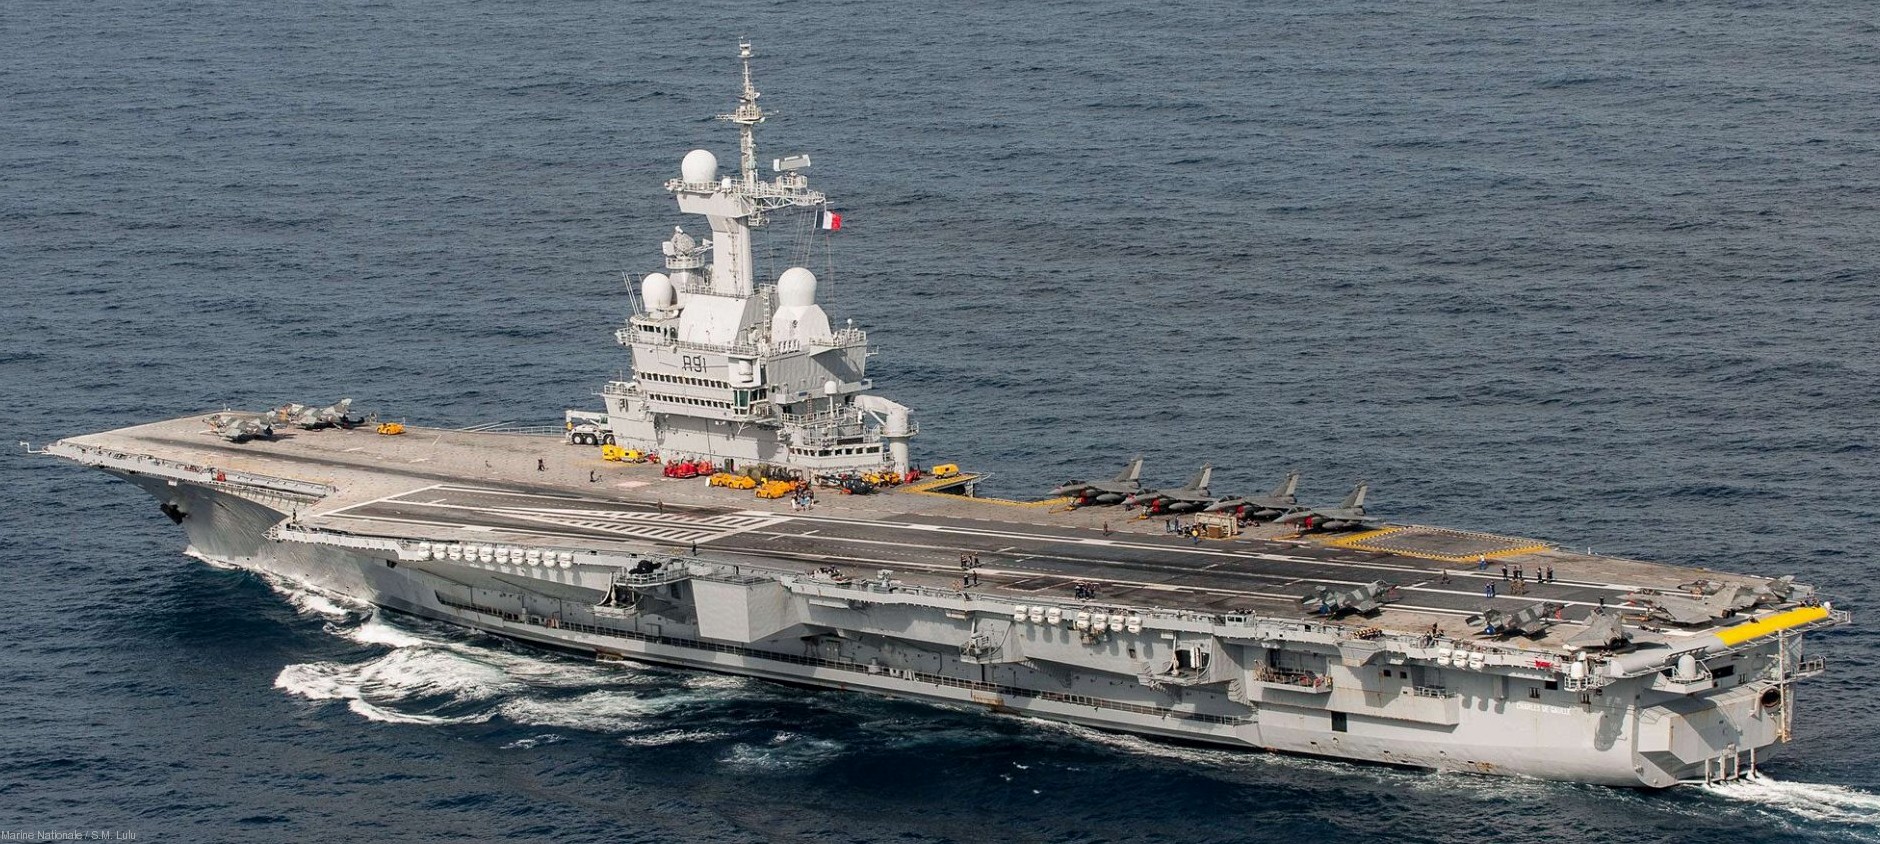 r-91 fs charles de gaulle aircraft carrier french navy 09